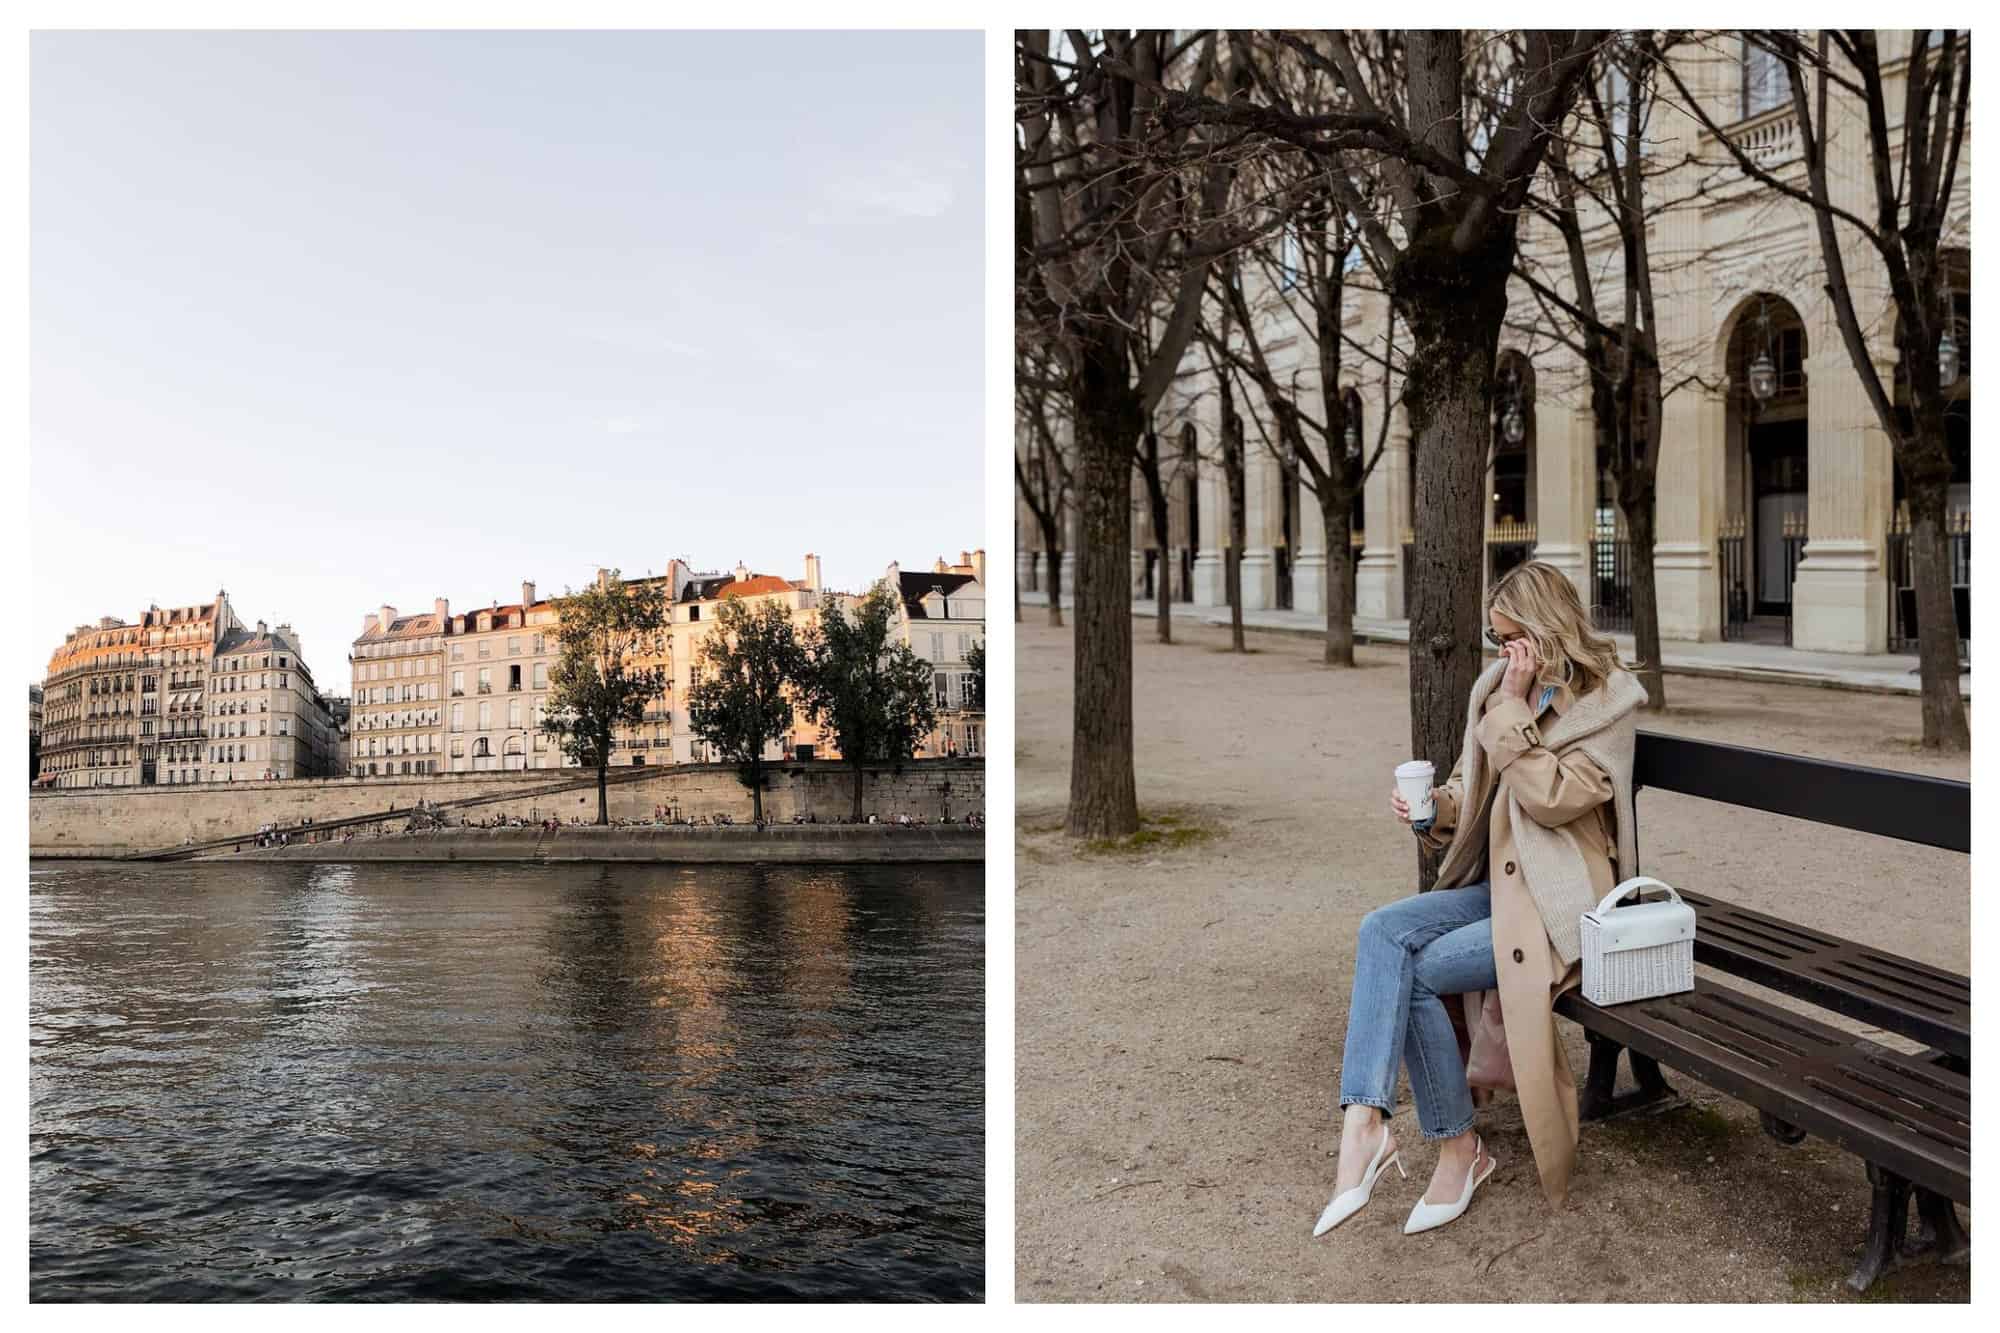 Left: a picture of the seine river in Paris at sunset, with people seen in the foreground sitting on the river bank. Right: a picture of a women sitting on a park bench at Palais Royal, drinking a takeaway coffee in a beige trench coat.